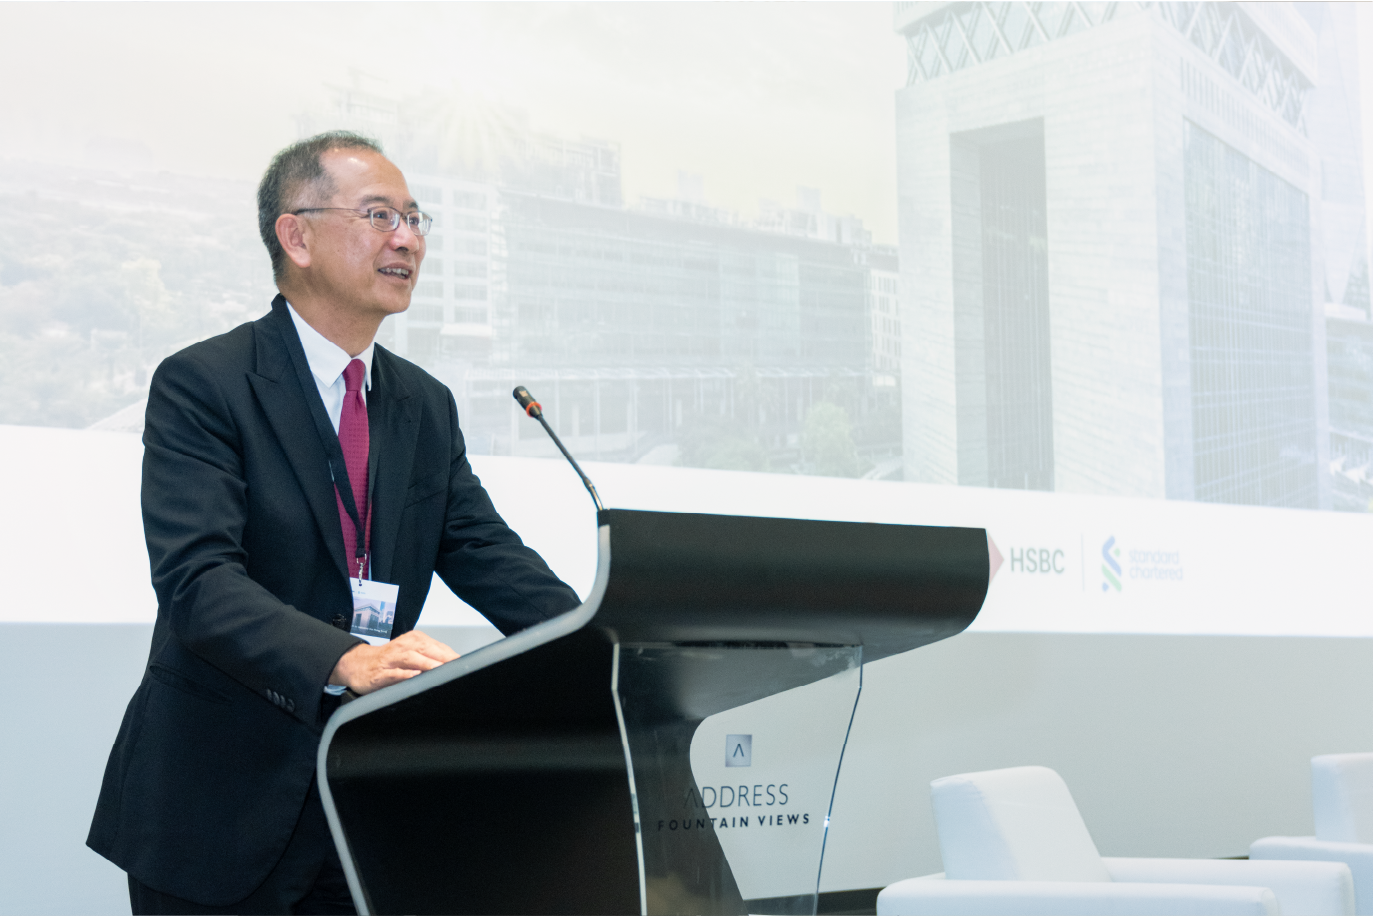 Mr Eddie Yue, Chief Executive of the Hong Kong Monetary Authority, delivers opening remarks on 31 May (Dubai time) at a luncheon in Dubai, the United Arab Emirates, which is attended by senior representatives from major local financial institutions and corporates.